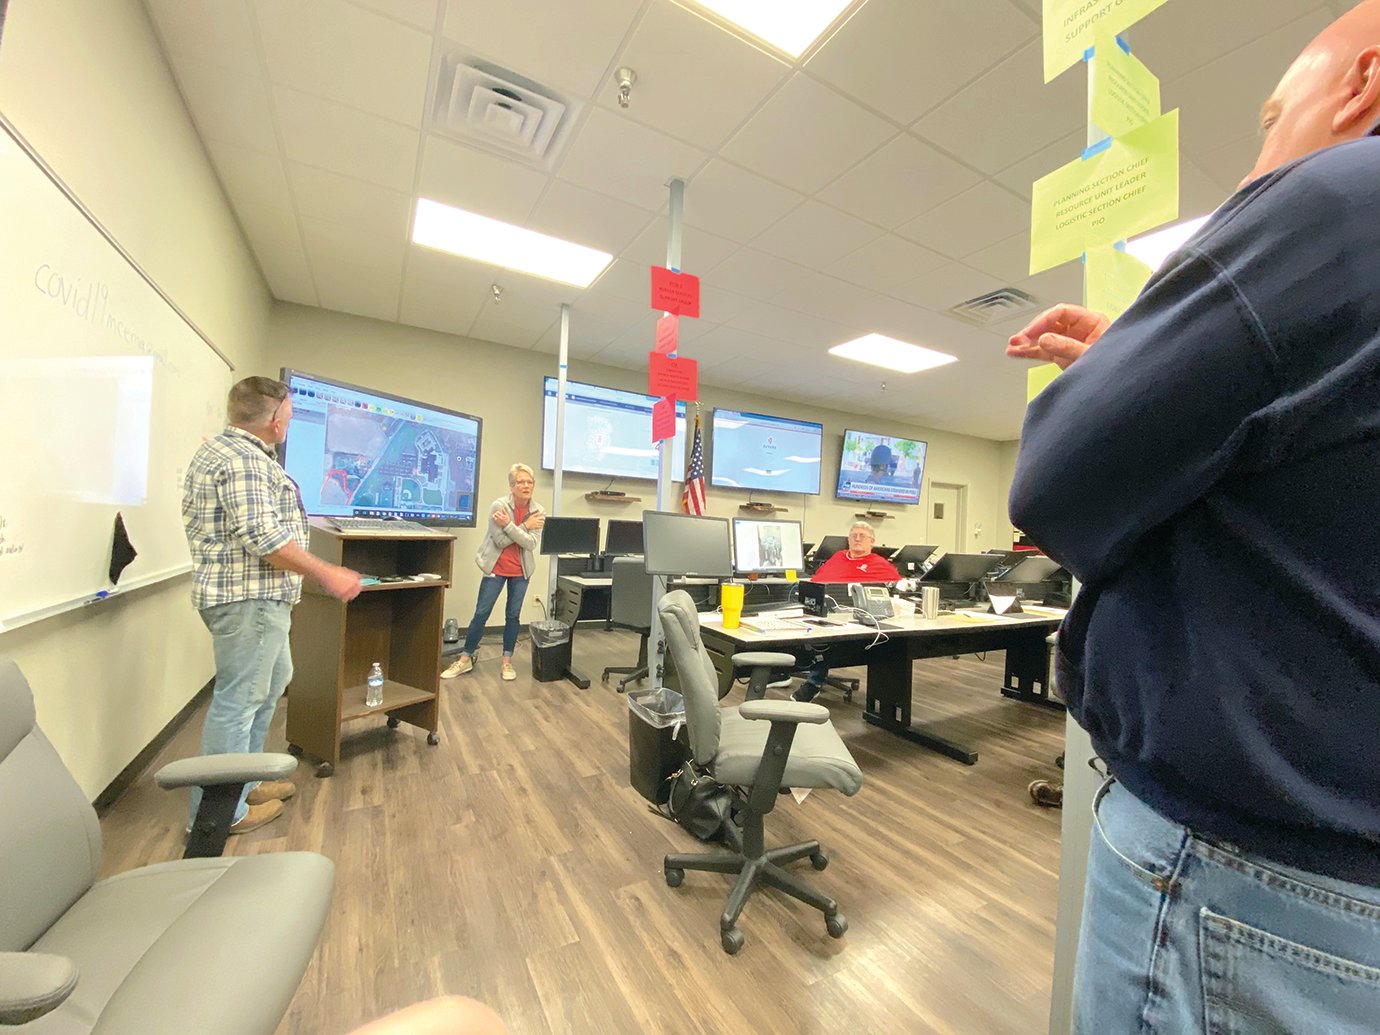 Montgomery County Health Department Administrator Amber Reed discusses plans for a drive-through testing site with EMA Deputy Director Brian Campbell (left) and Crawfordsville Mayor Todd Barton (right) at the Emergency Operations Center at the EMA Building on Sunday, March 22.